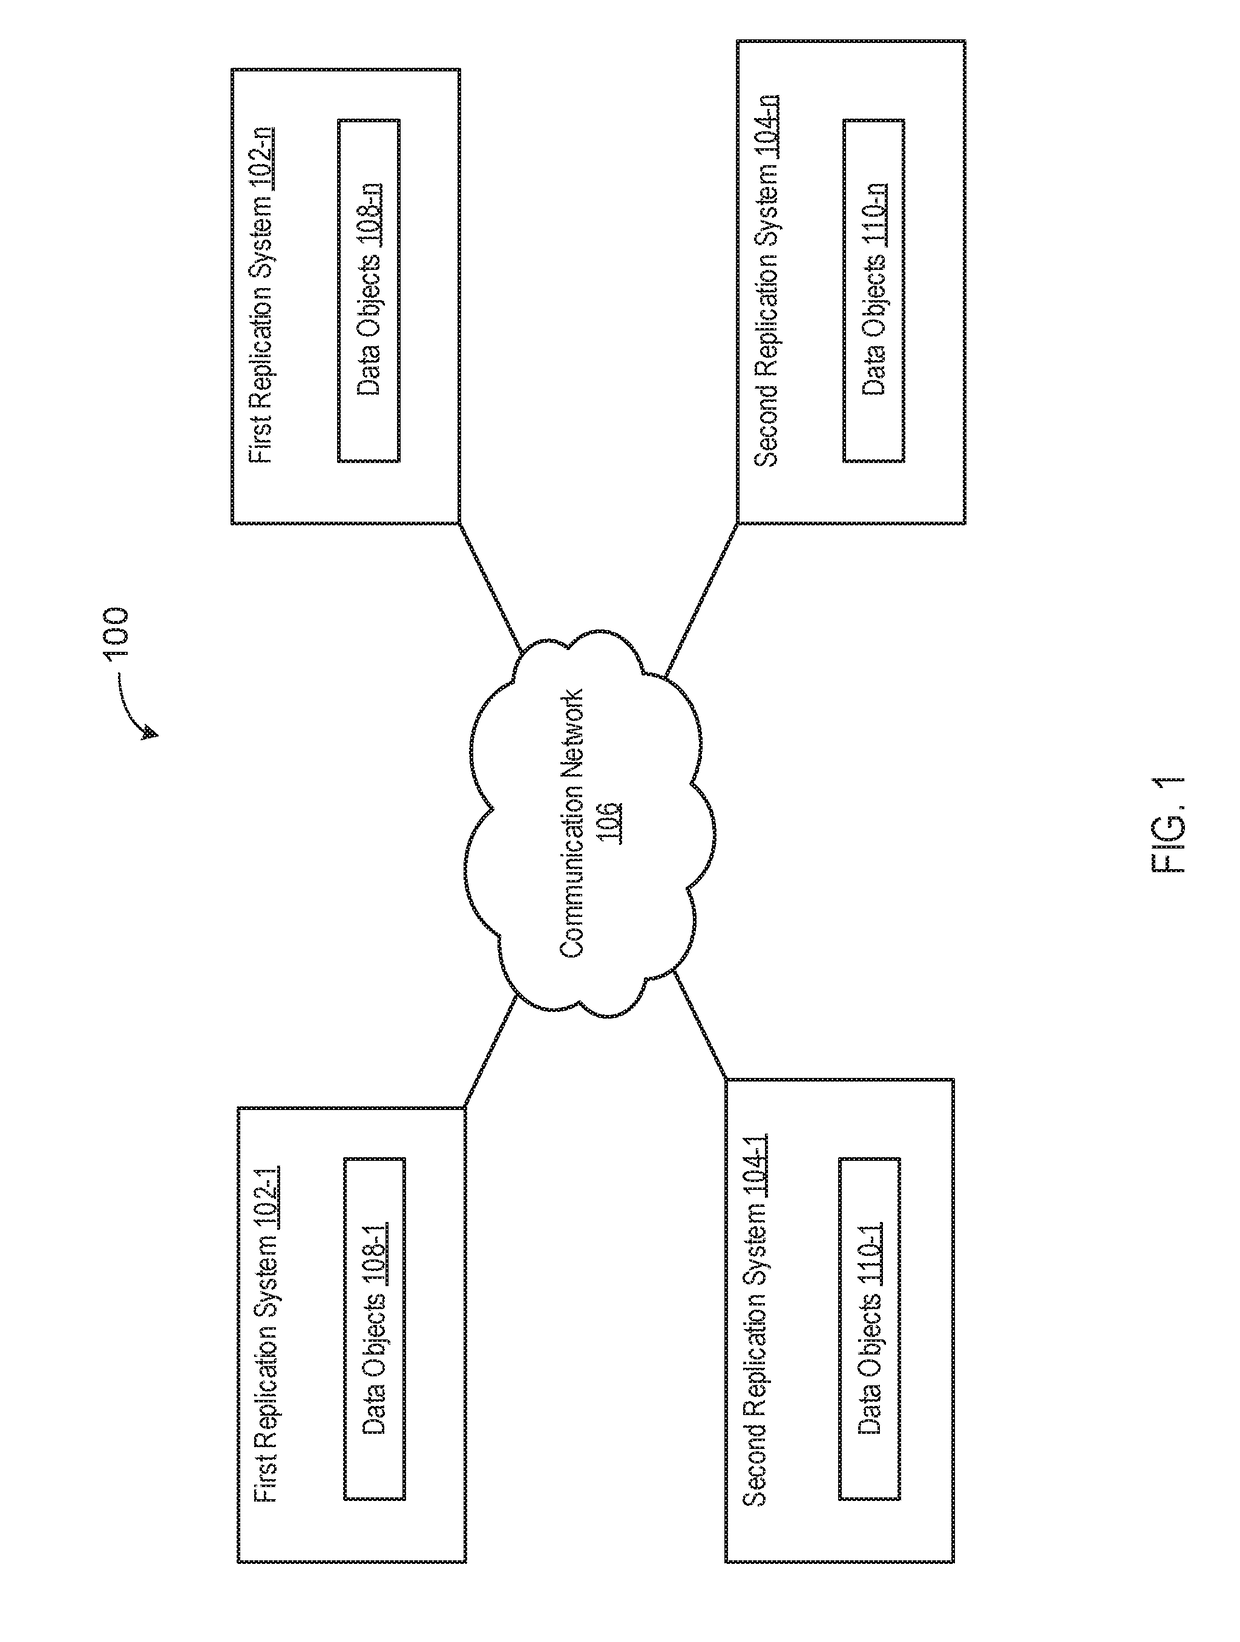 Systems and methods for adaptive data replication